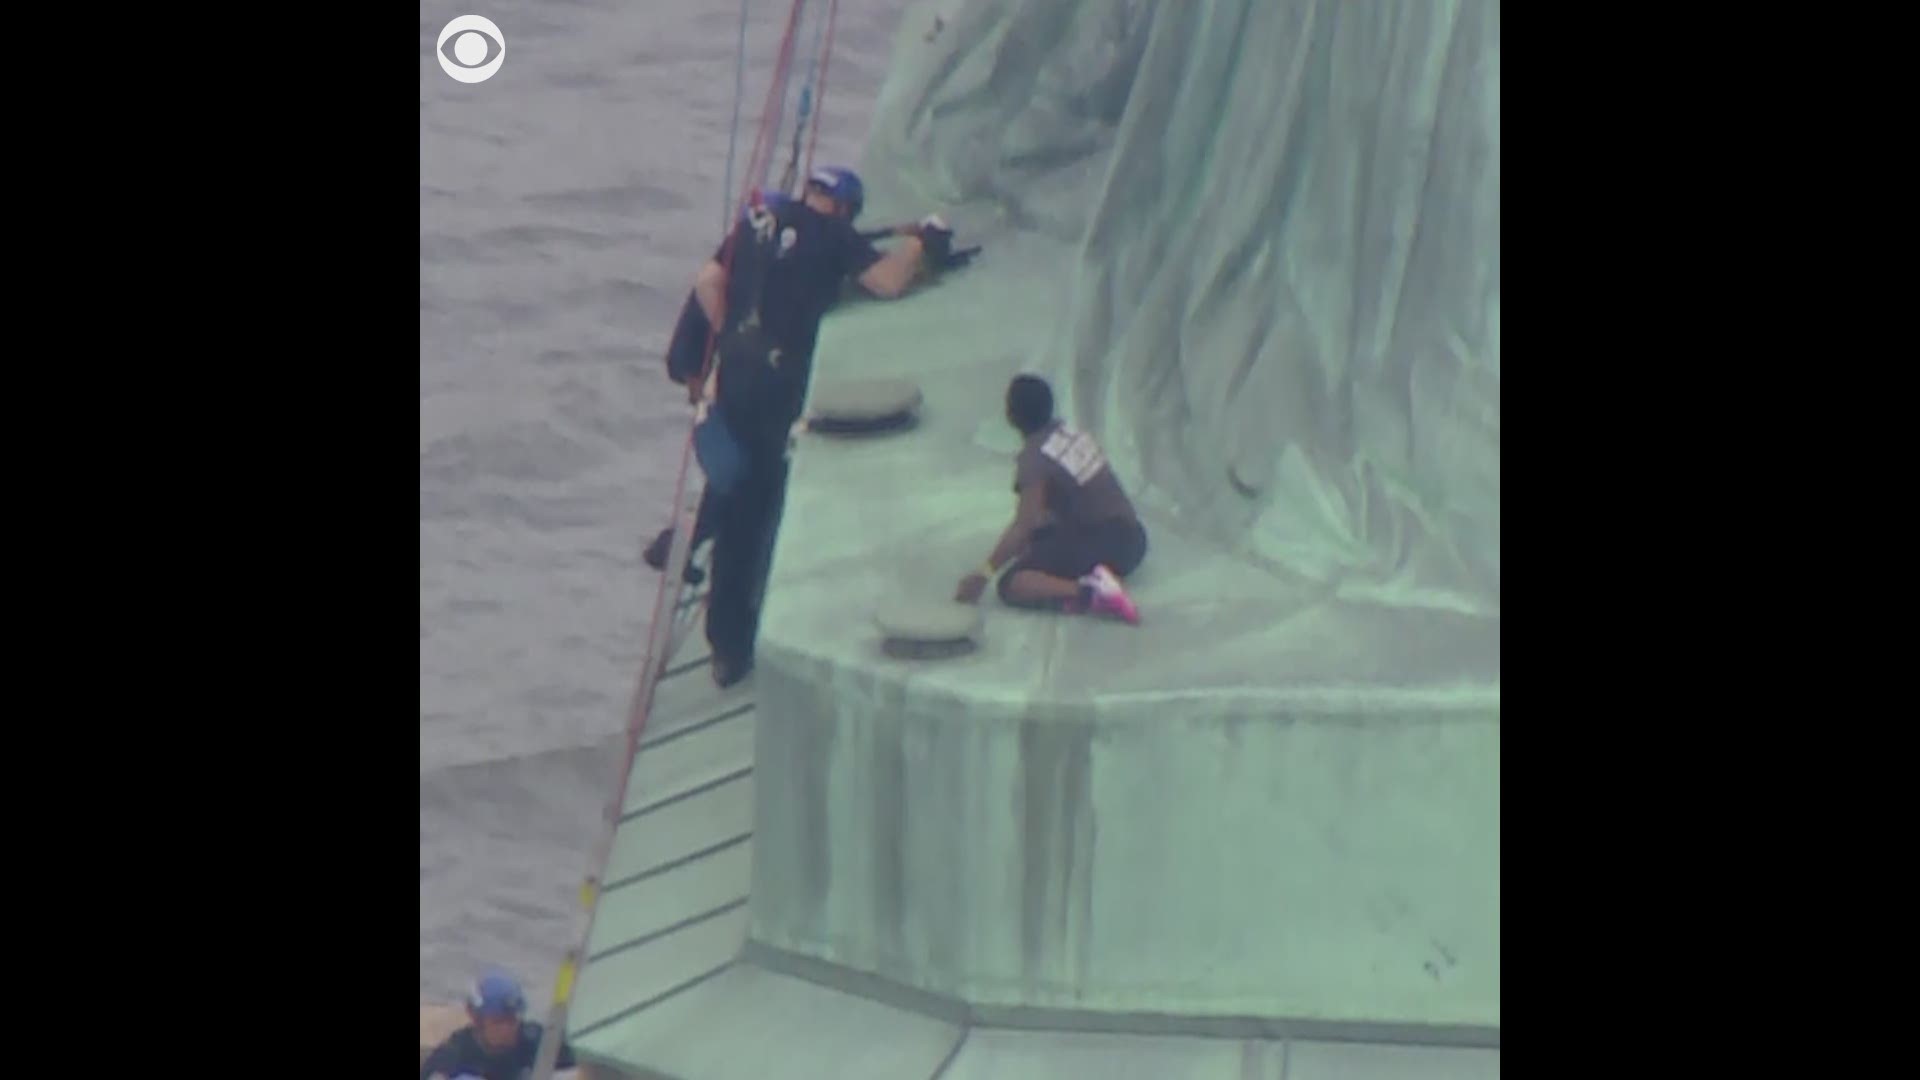 A protester who climbed the Statue of Liberty's base was escorted down by police after a roughly four-hour standoff that forced the evacuation of Liberty Island on the Fourth of July.